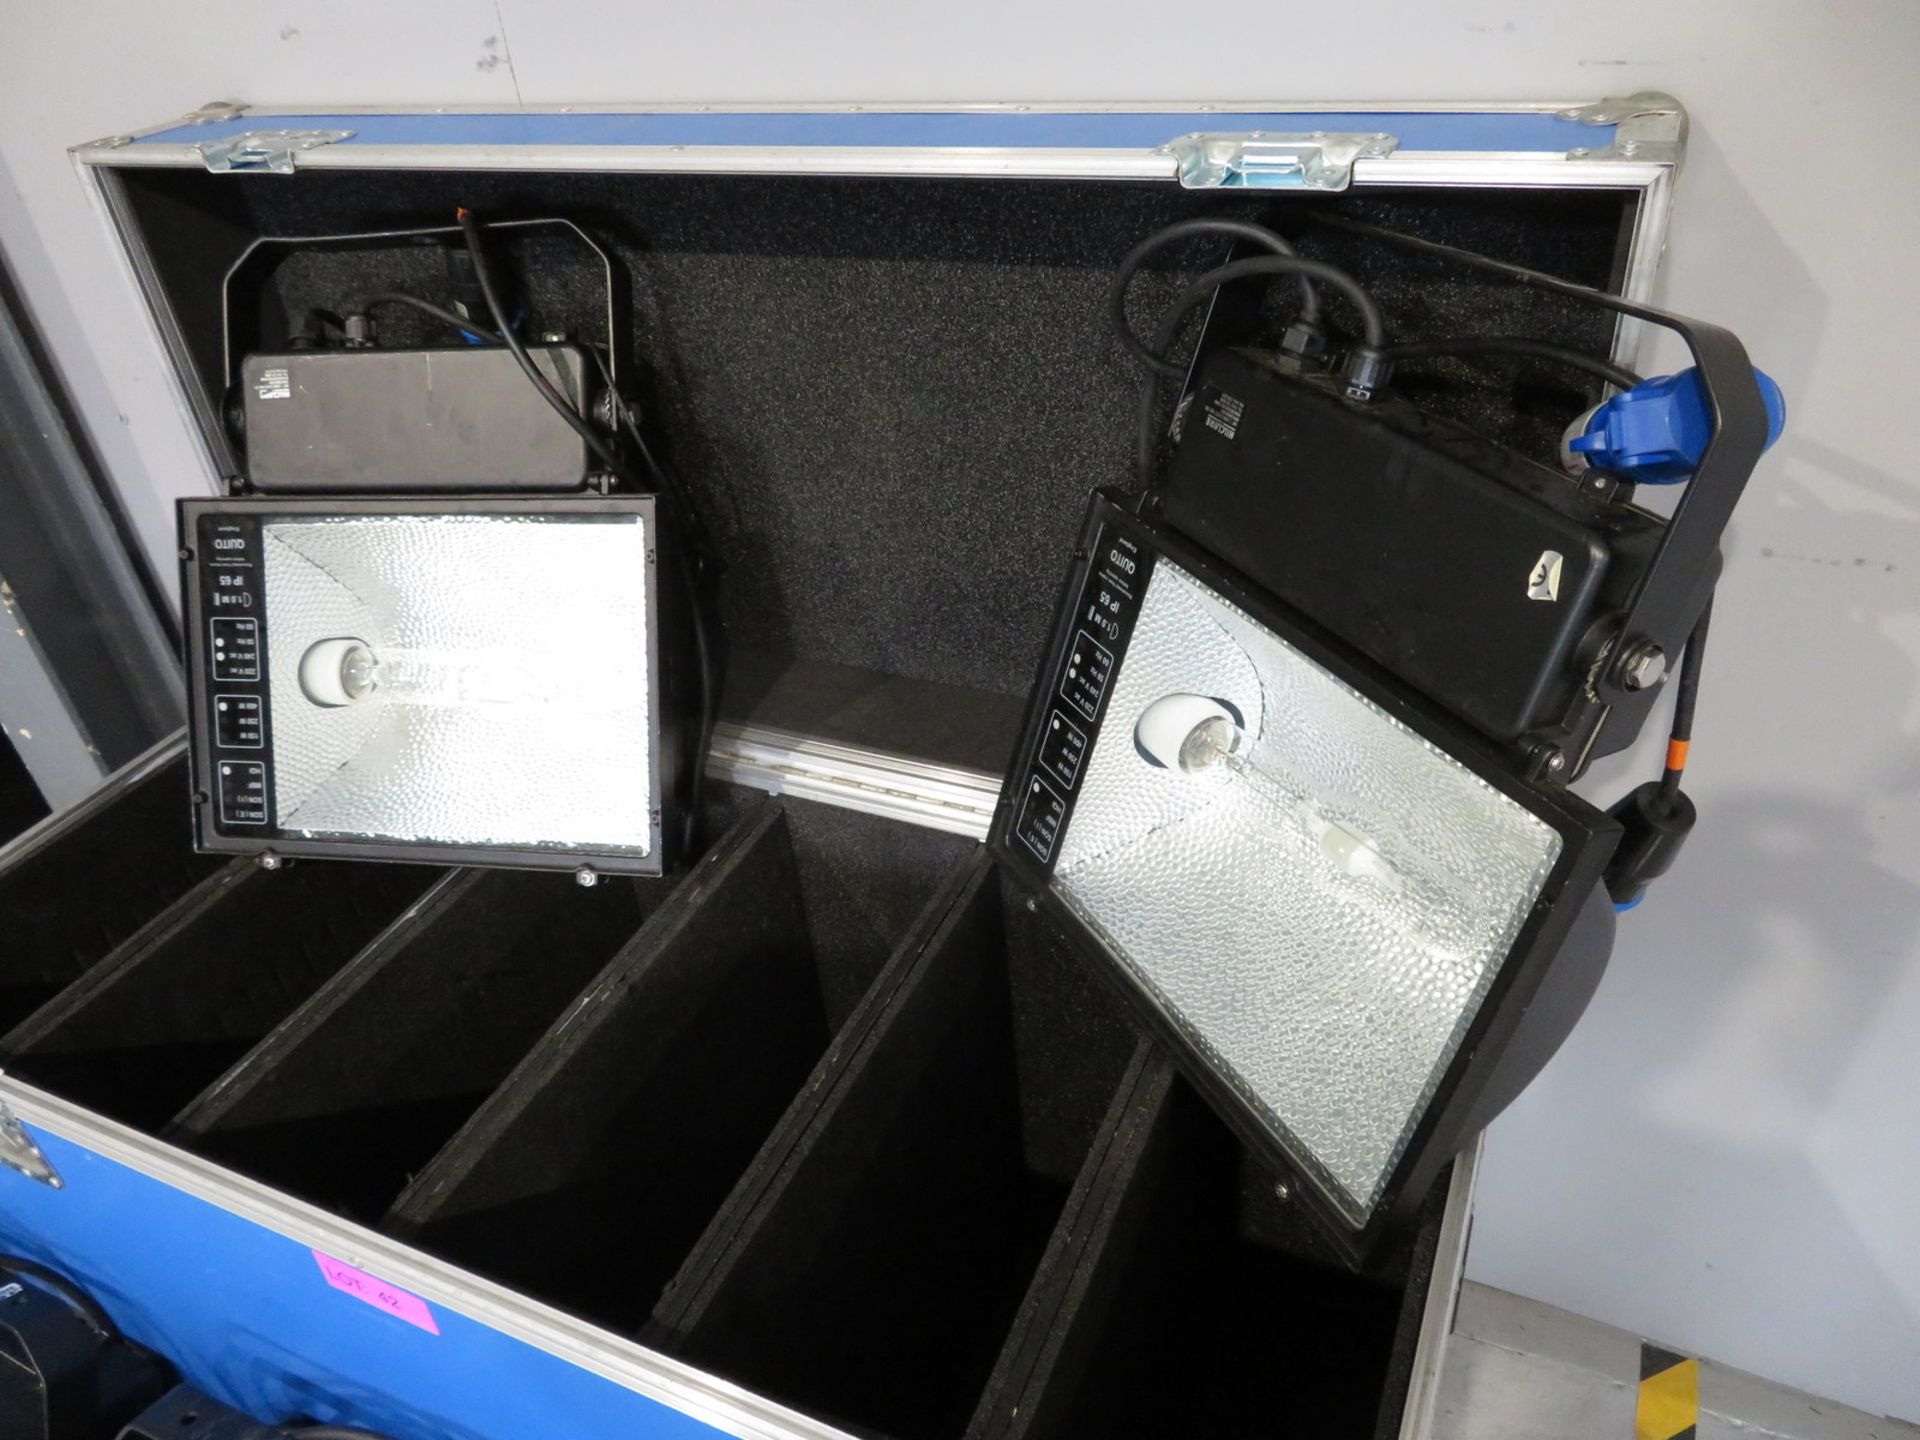 5x HQI 400w Floodlights in flight case. Includes safety bonds. 4 in working condition & 1 - Image 8 of 9